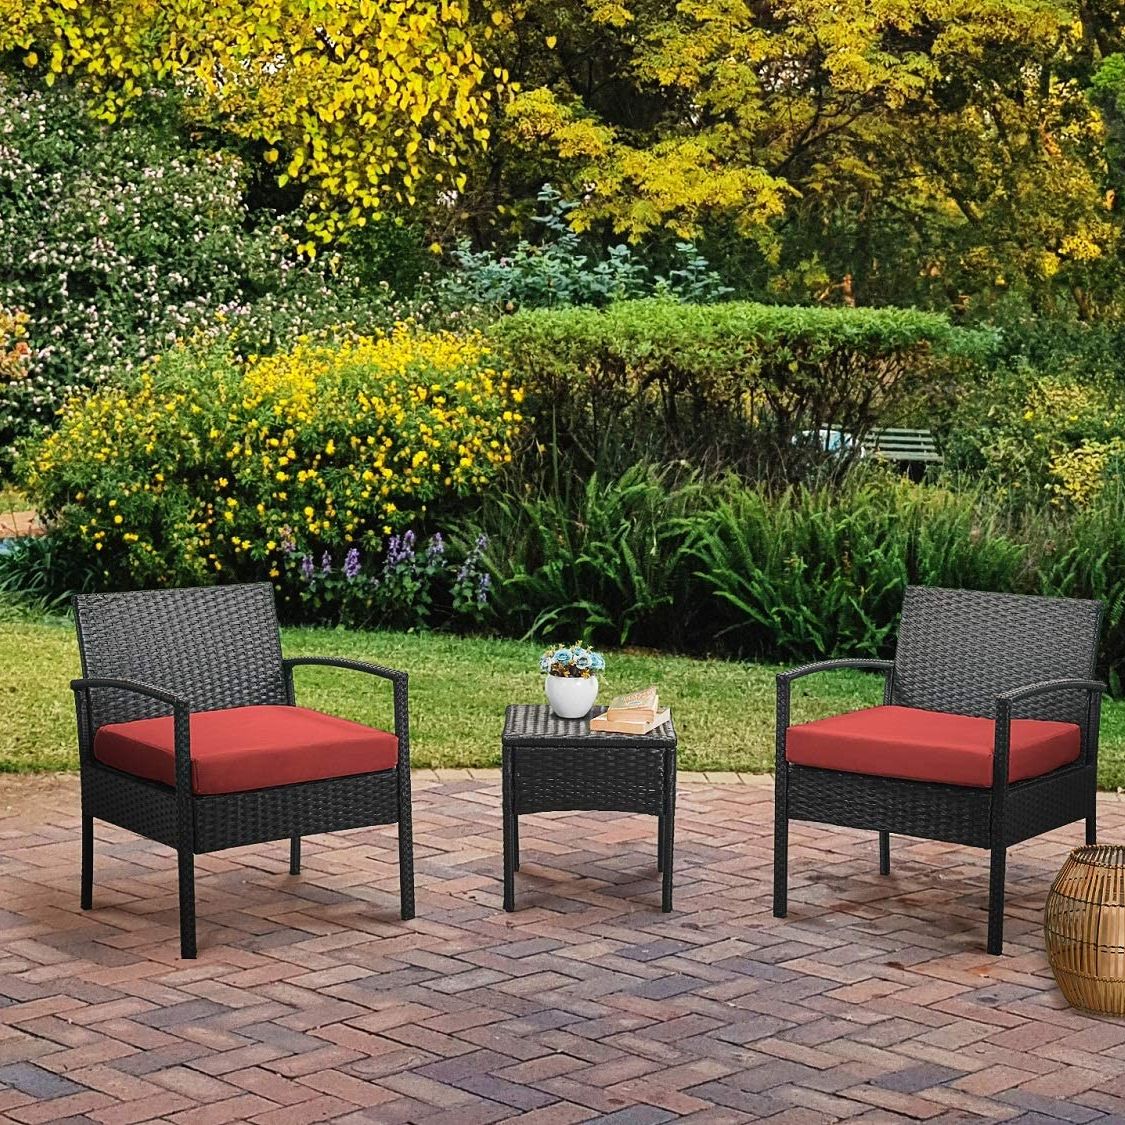 8 Best Patio Furniture Sets 2021 The, Patio Furniture Less Than 1000